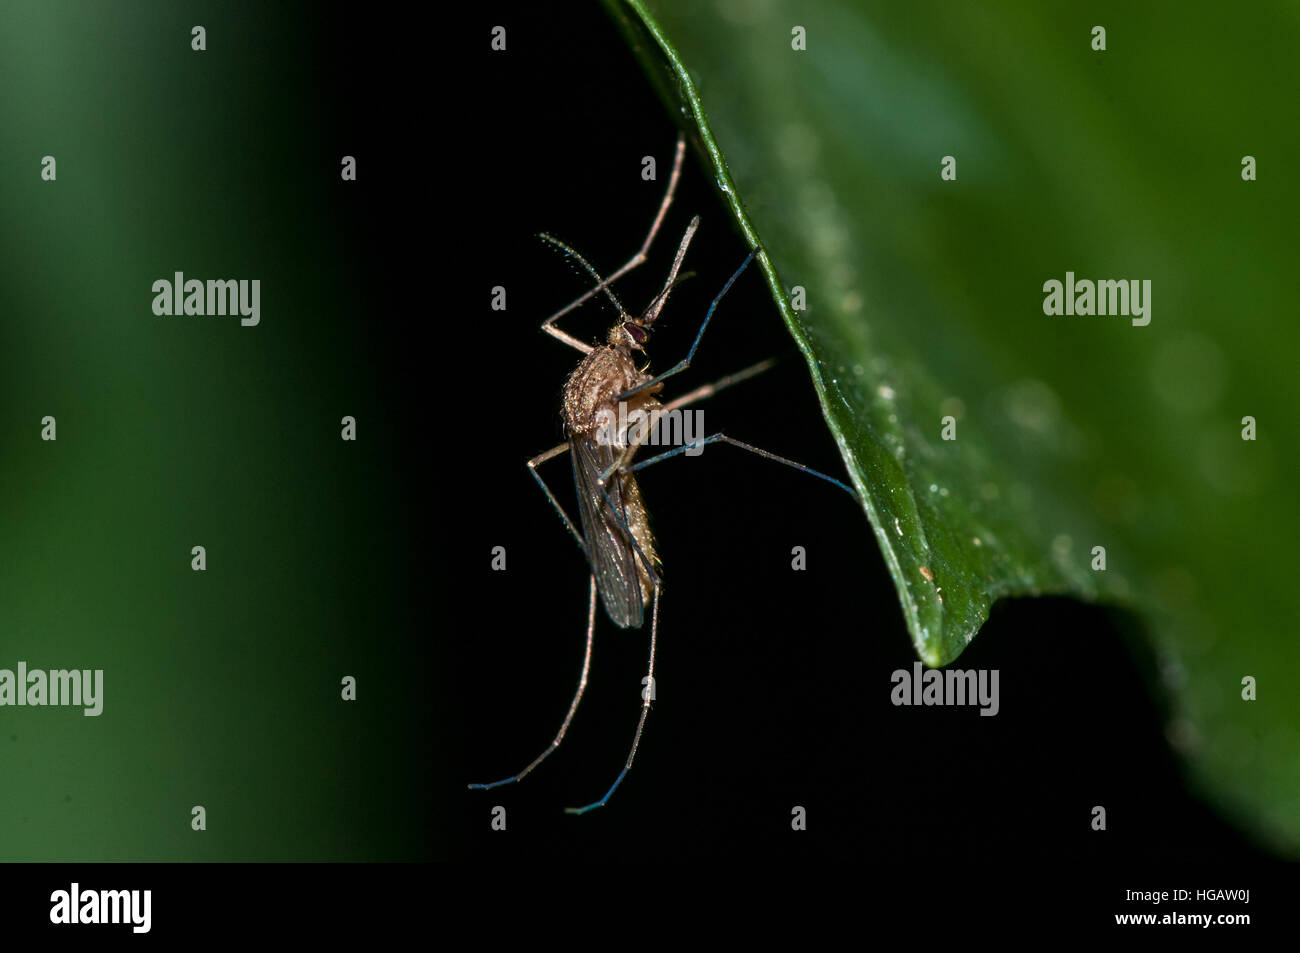 A mosquito in a green leaf Stock Photo